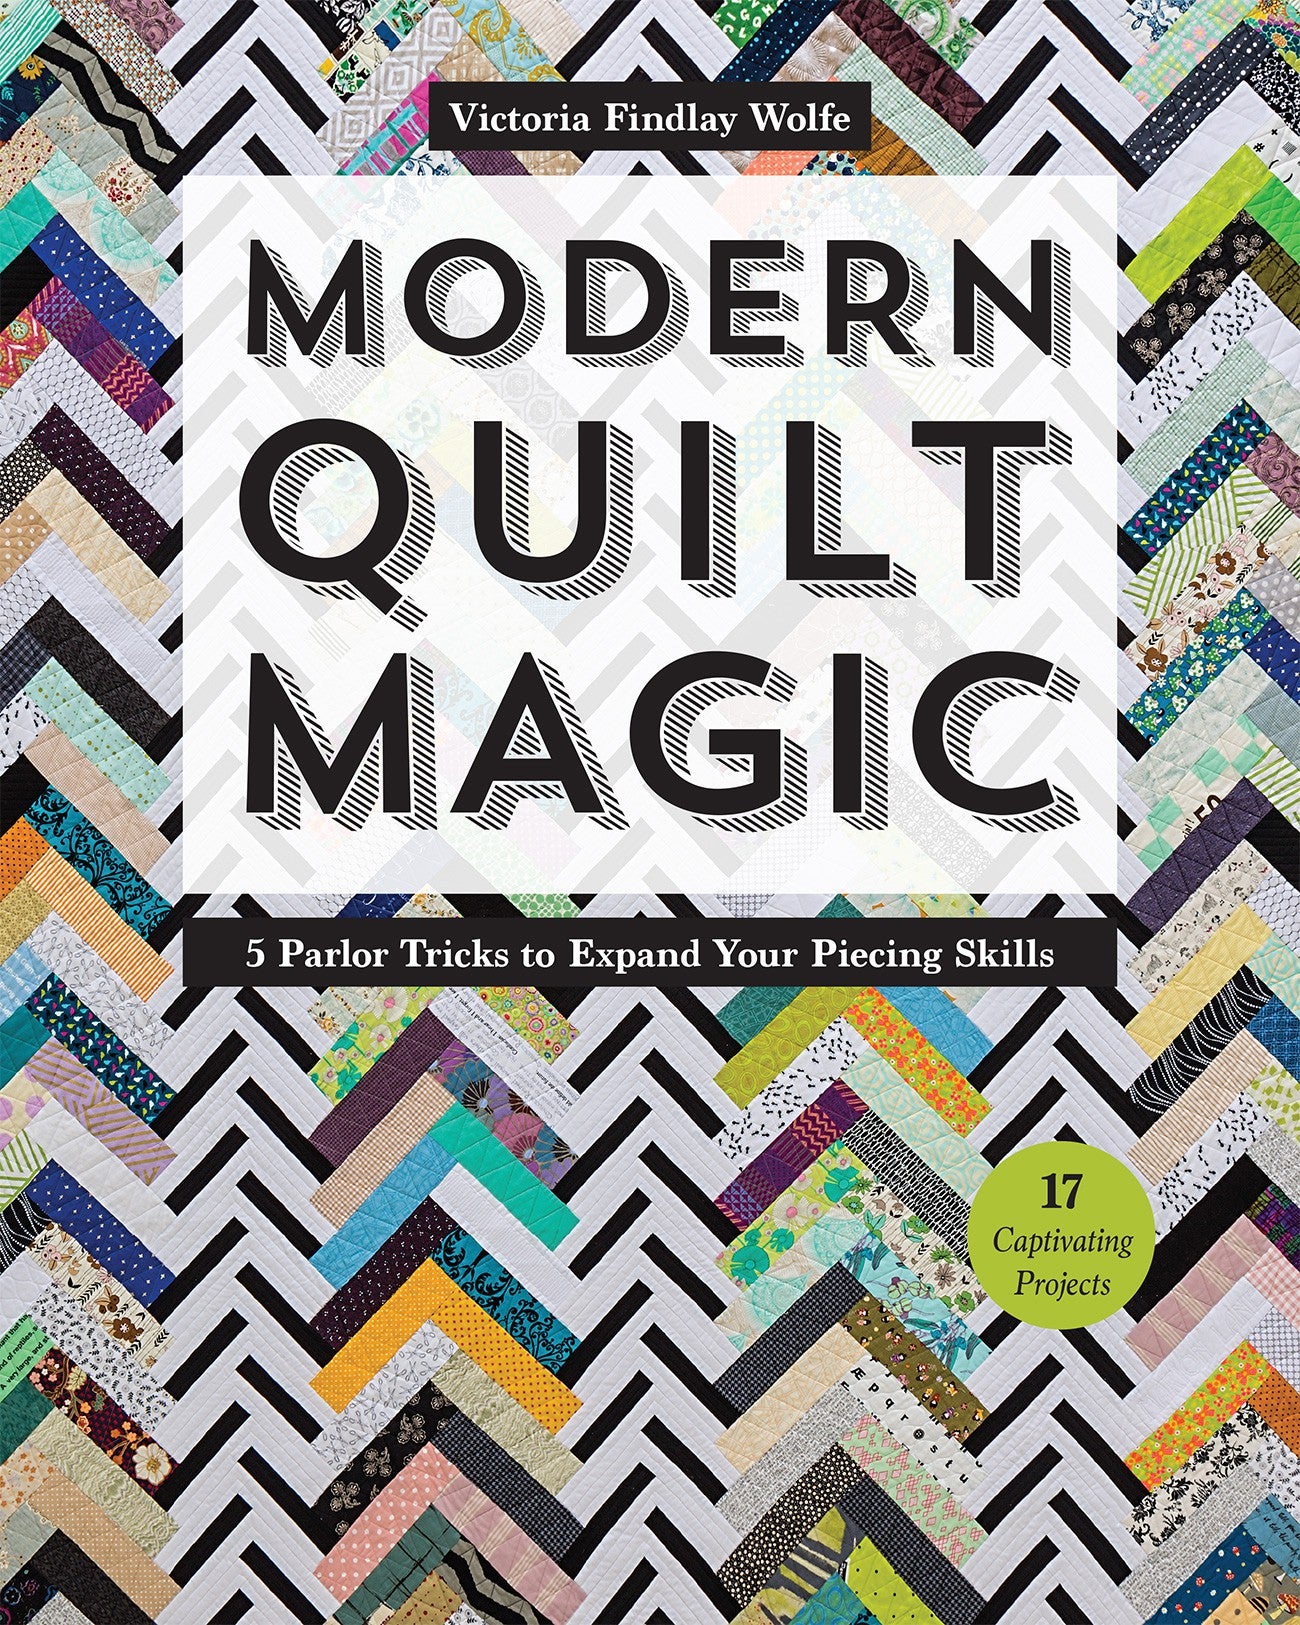 Modern Quilt Magic Quilt Pattern Book by Victoria Findlay Wolfe for Stash Books